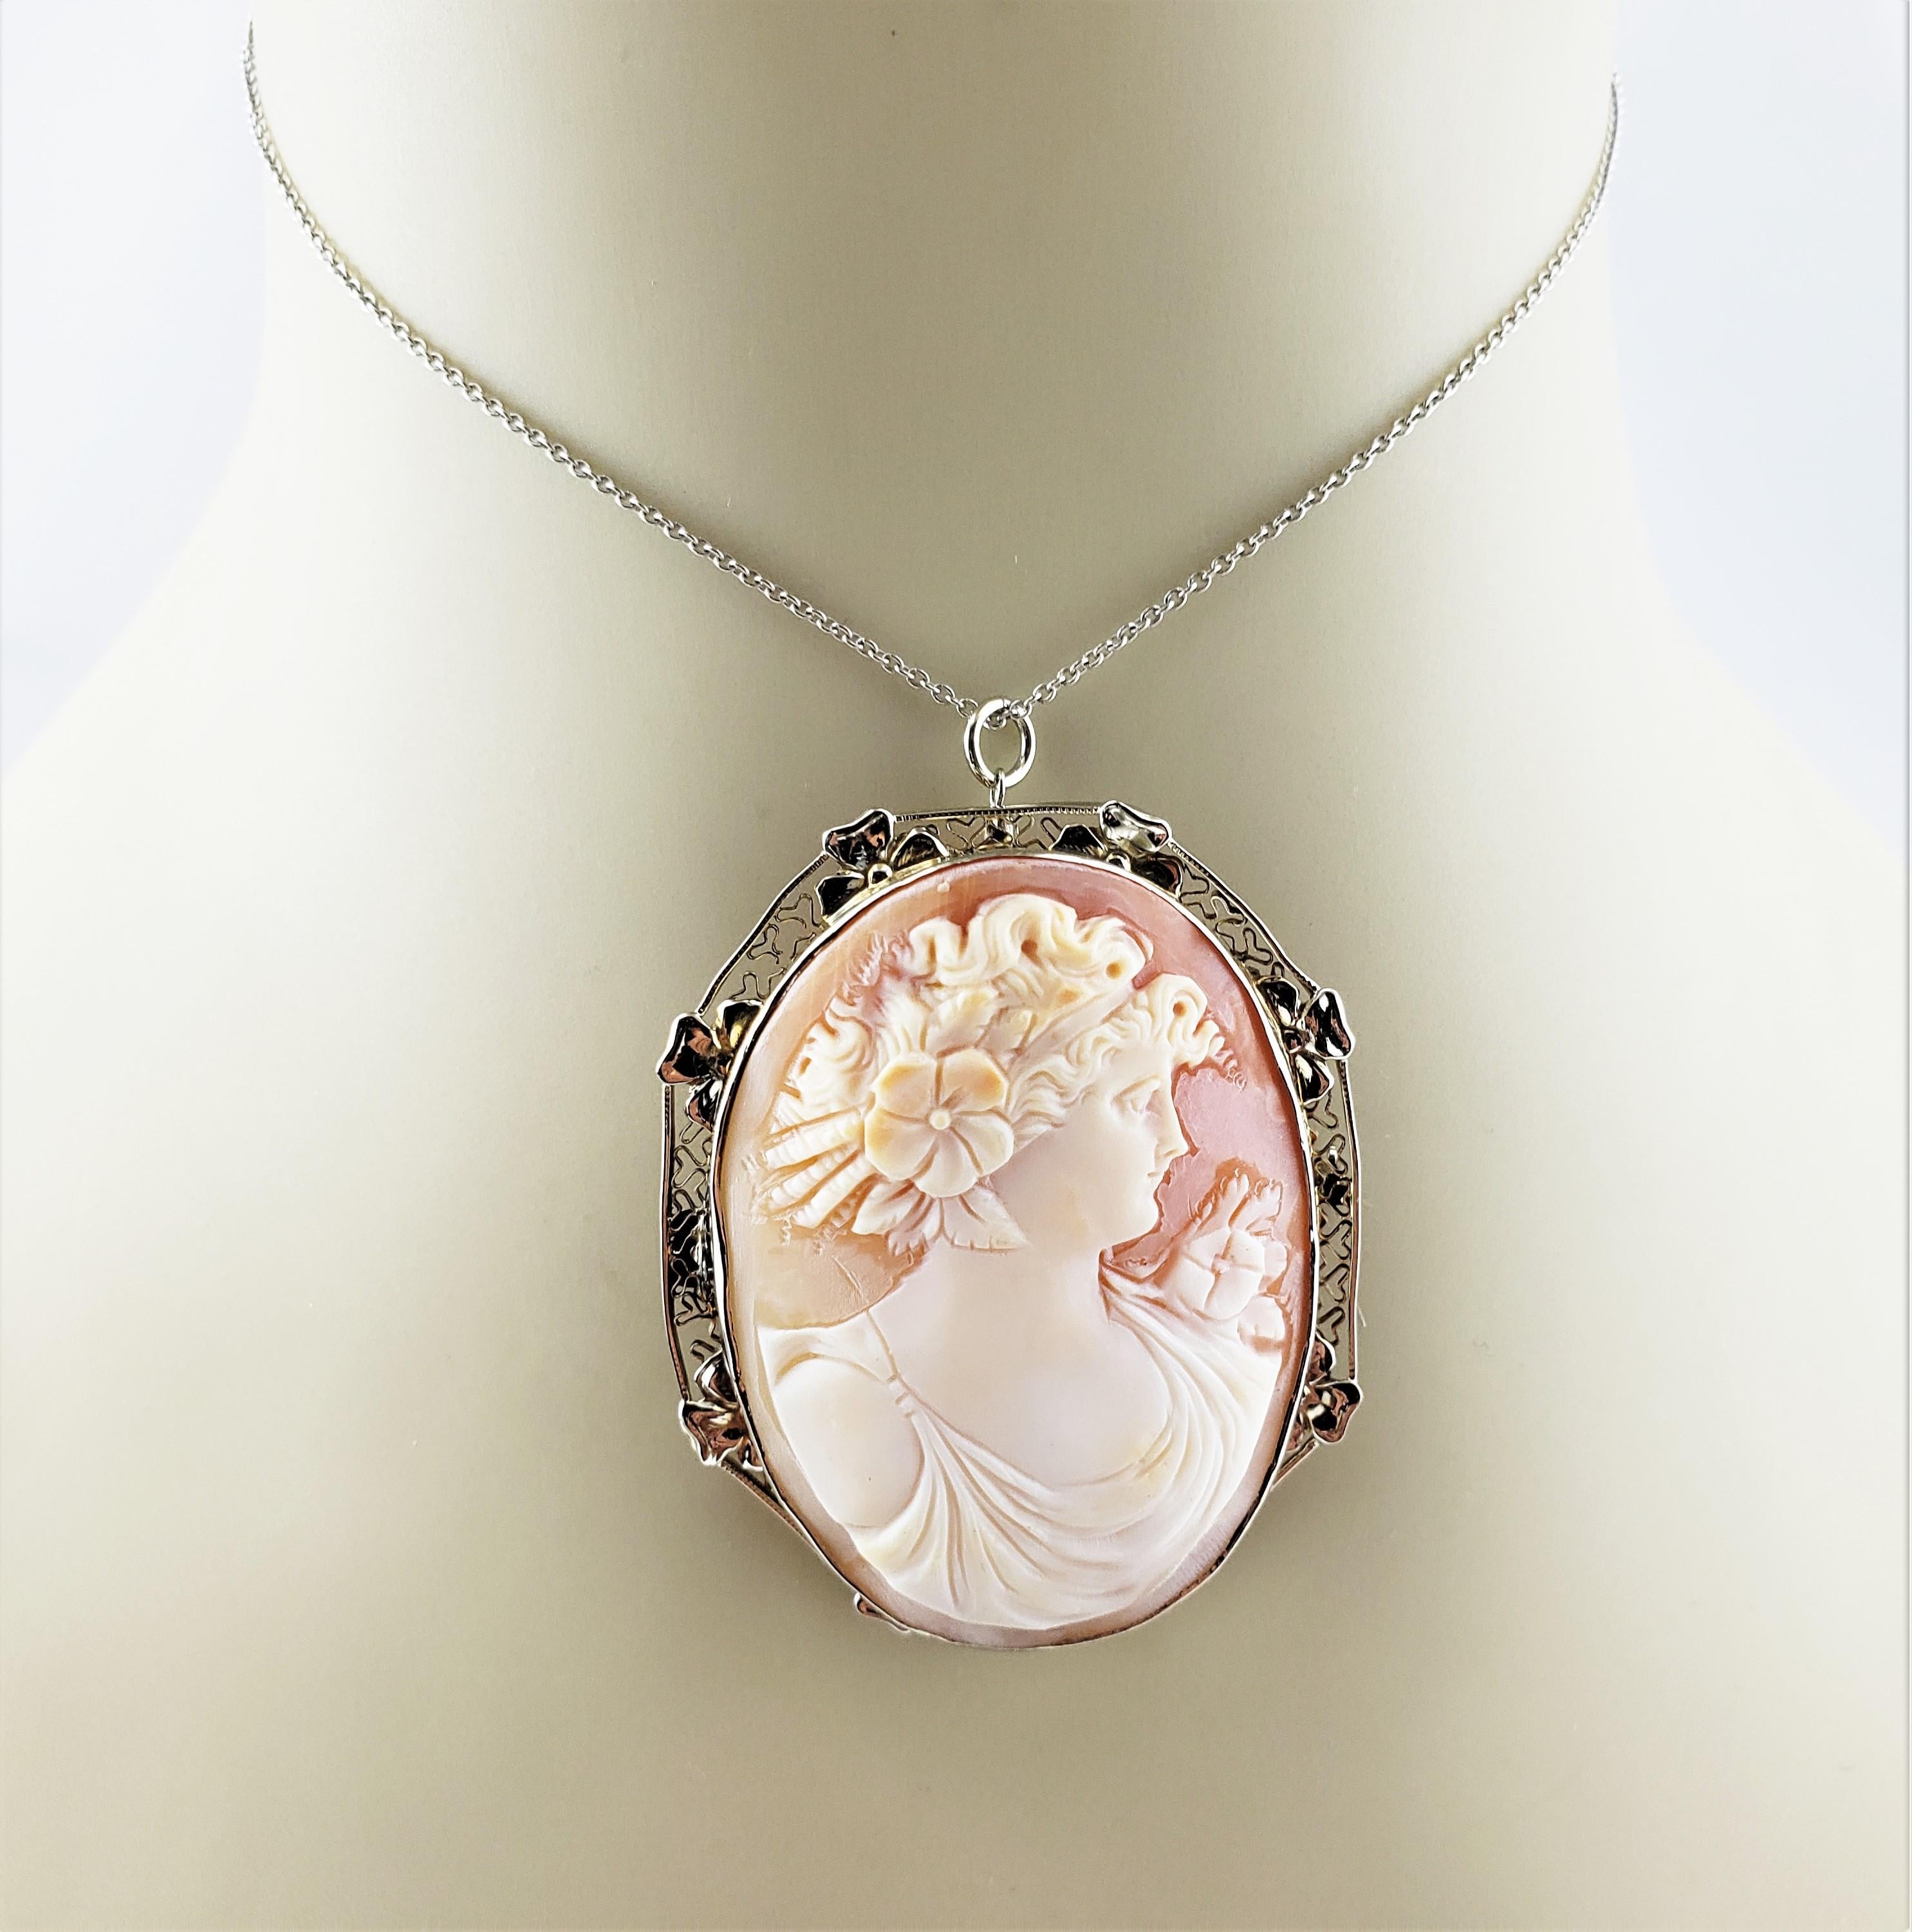 14 Karat Yellow and White Gold Cameo Brooch/Pendant For Sale 4